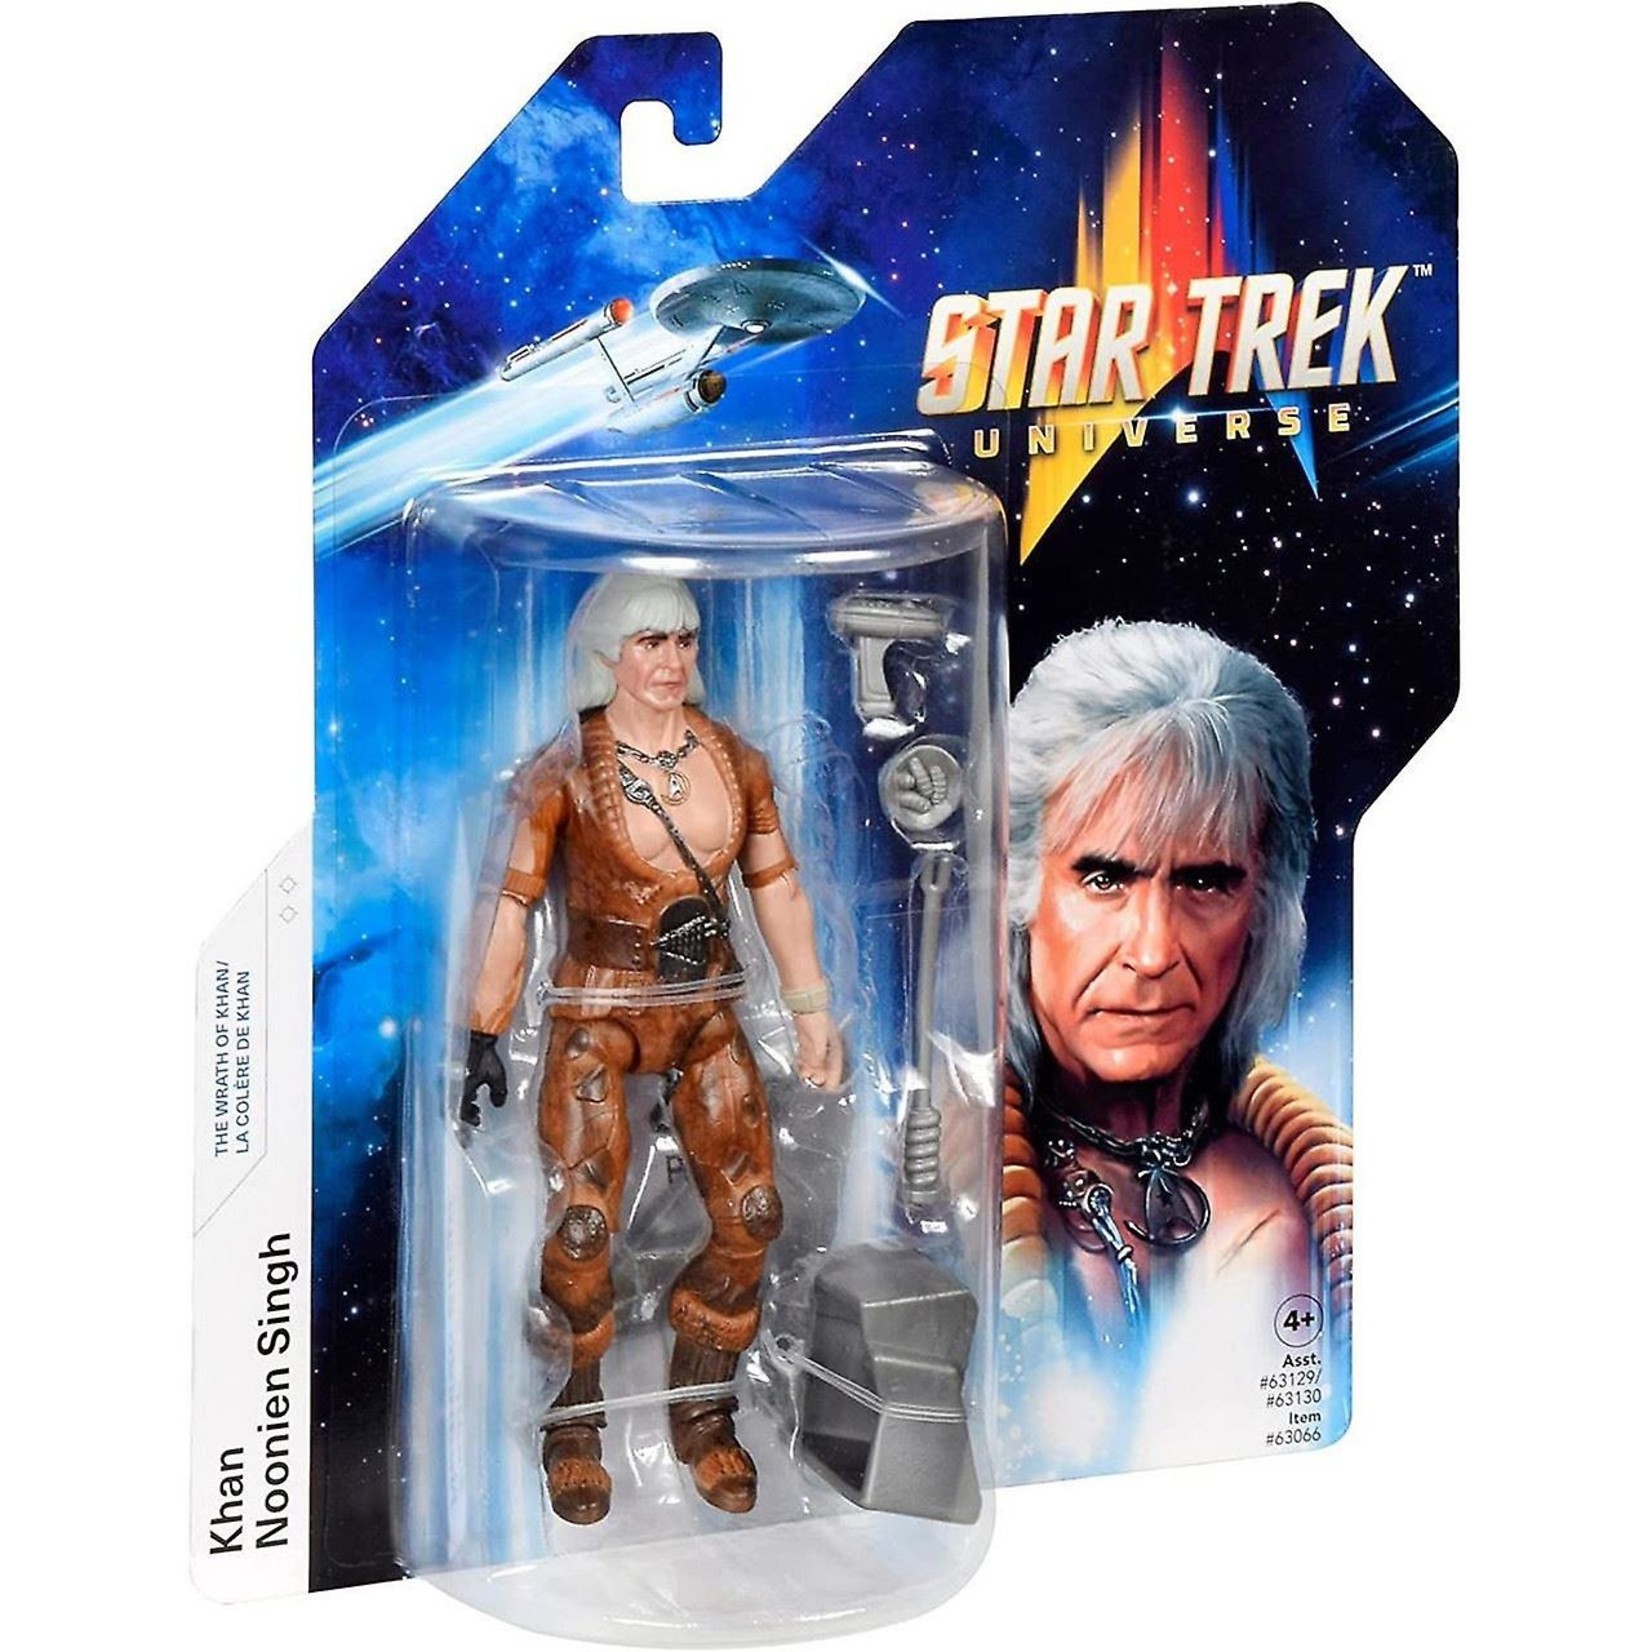 Playmates Toys Playmates Toys Star Trek The Wrath of Khan Noonien Singh 5 Inch Action Figure